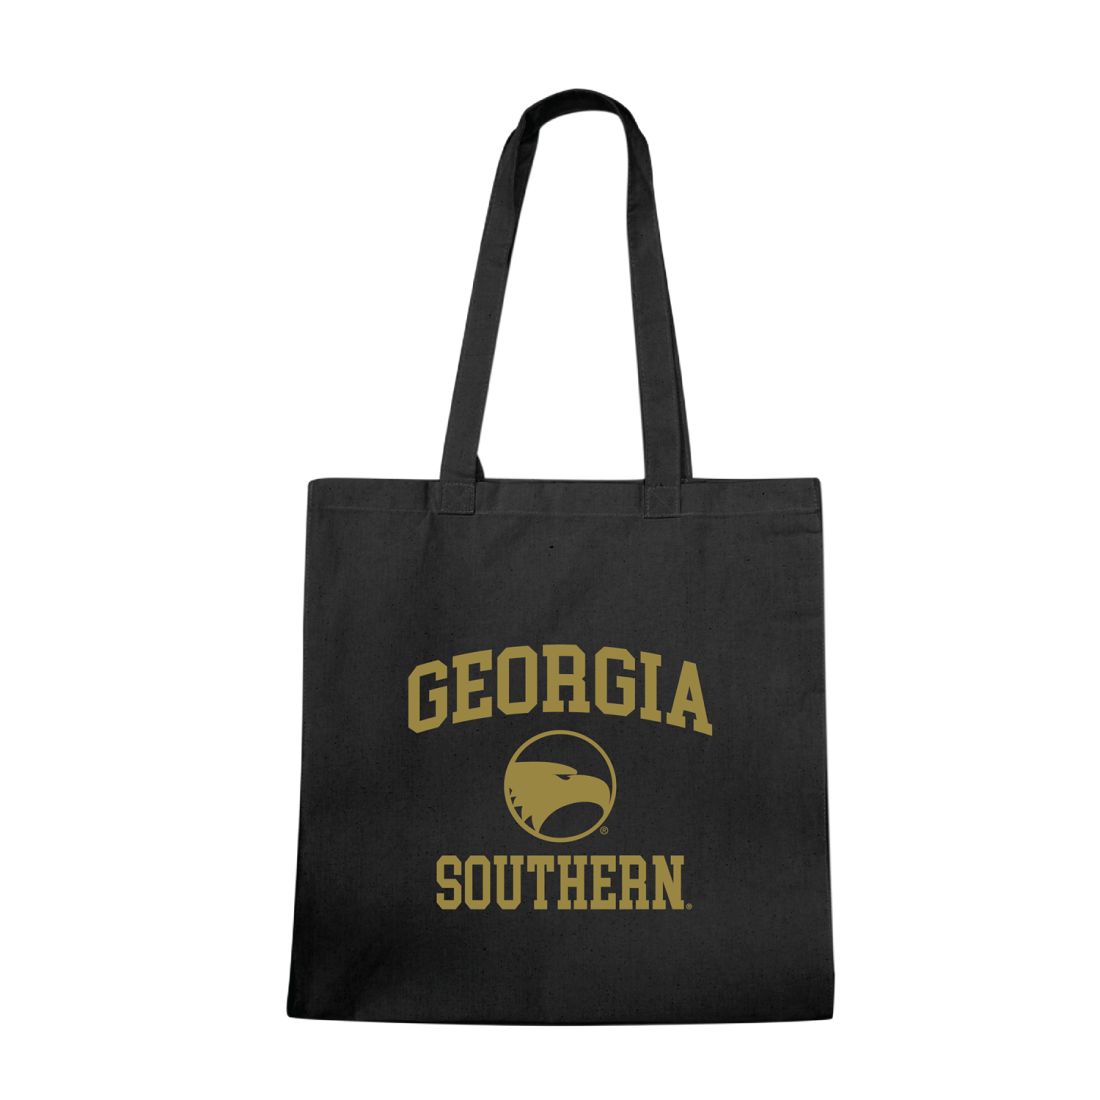 Georgia Southern University Eagles Institutional Seal Tote Bag